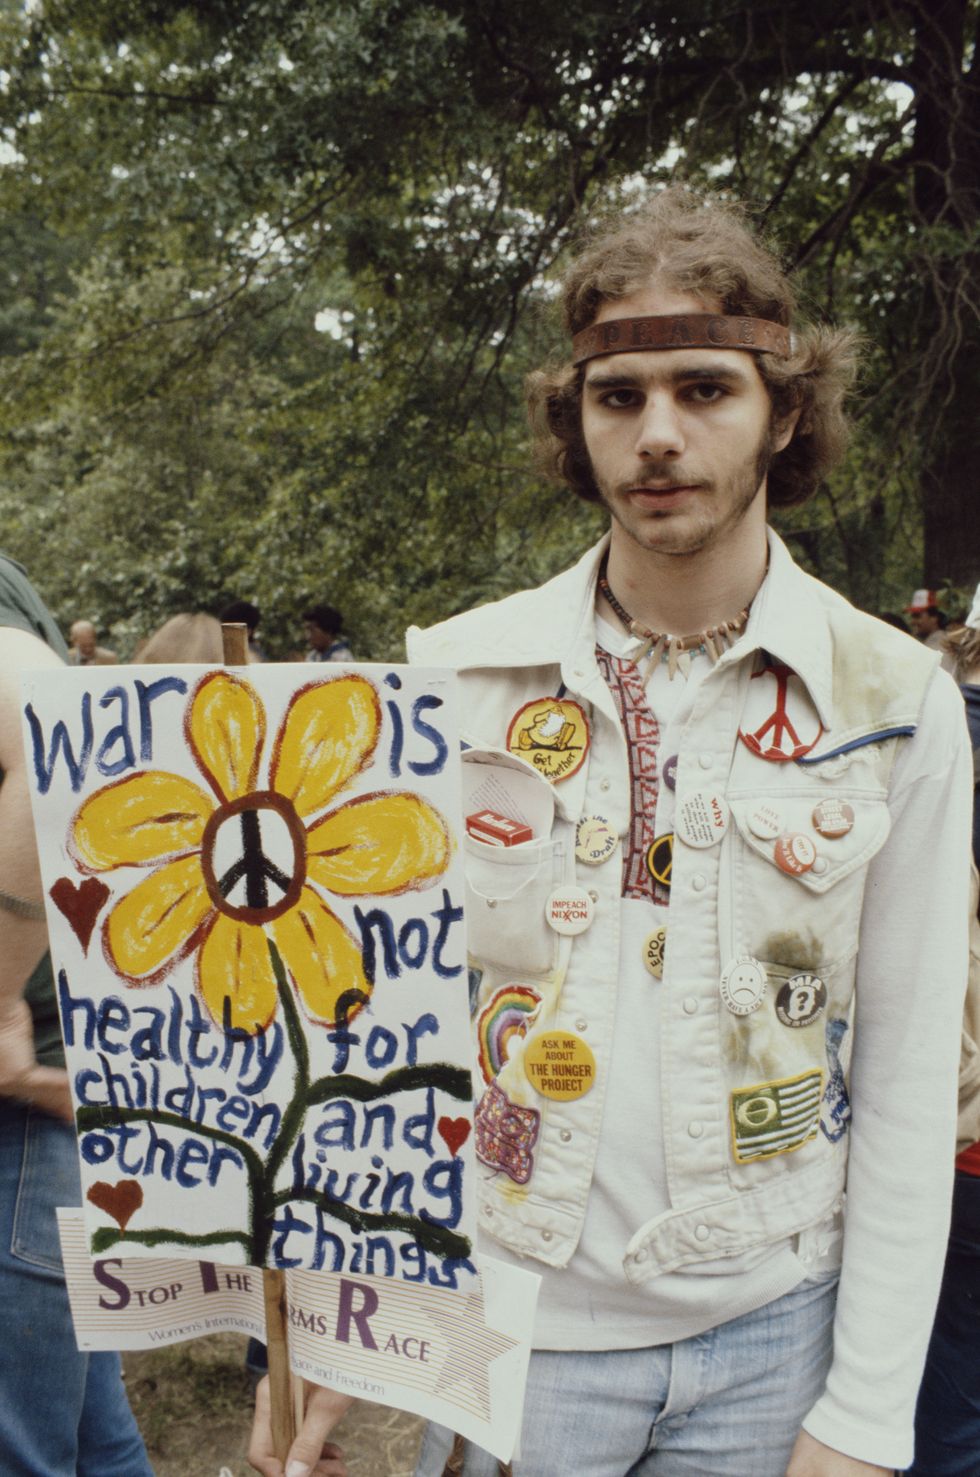 Hippies from the '60s and '70s